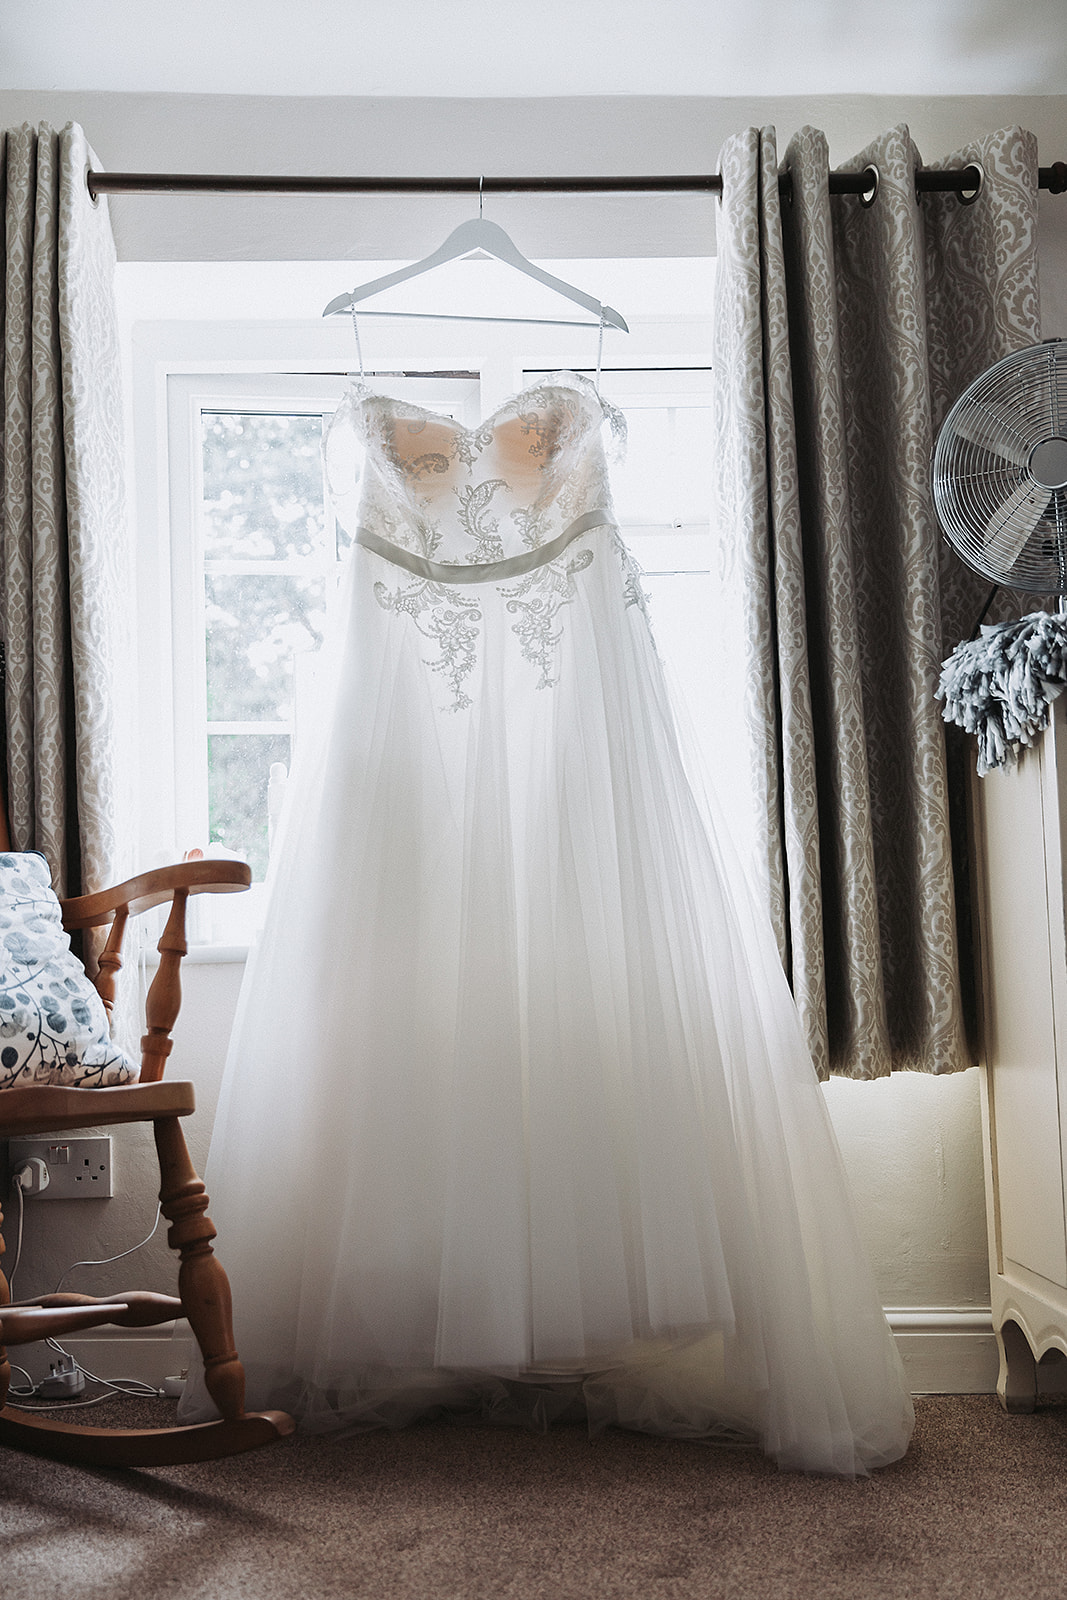 Wedding dress hanging in the brides room. Wedding Photo by Perfect Memories Photography